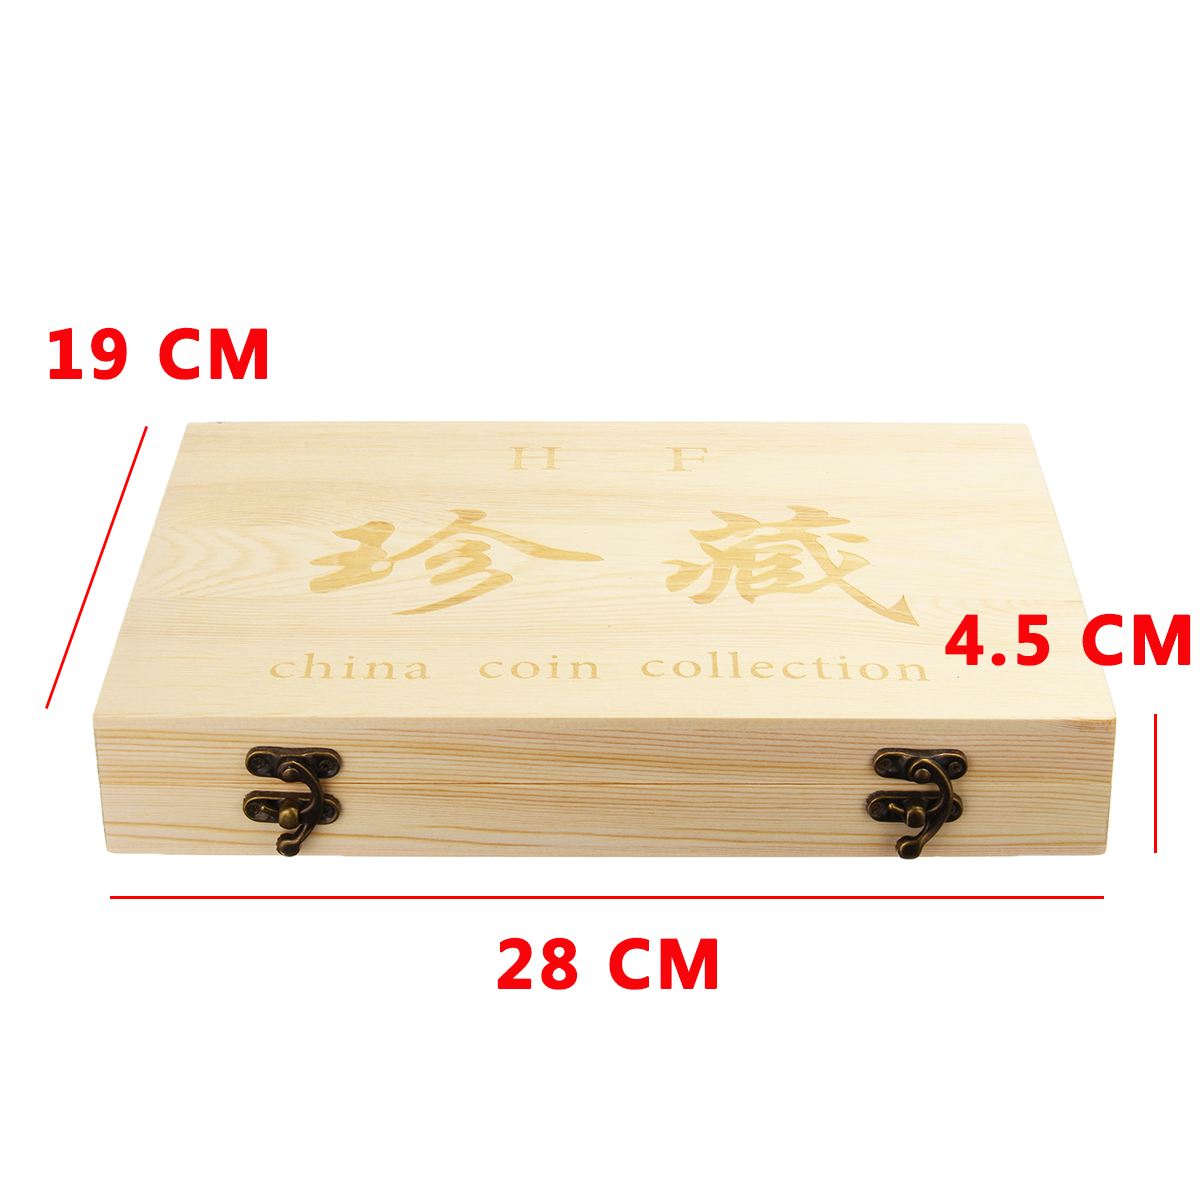 100PCS-Rugged-Wooden-Commemorative-Coin-Display-Case-Capsule-Holder-Storage-Collection-Box-1646129-4